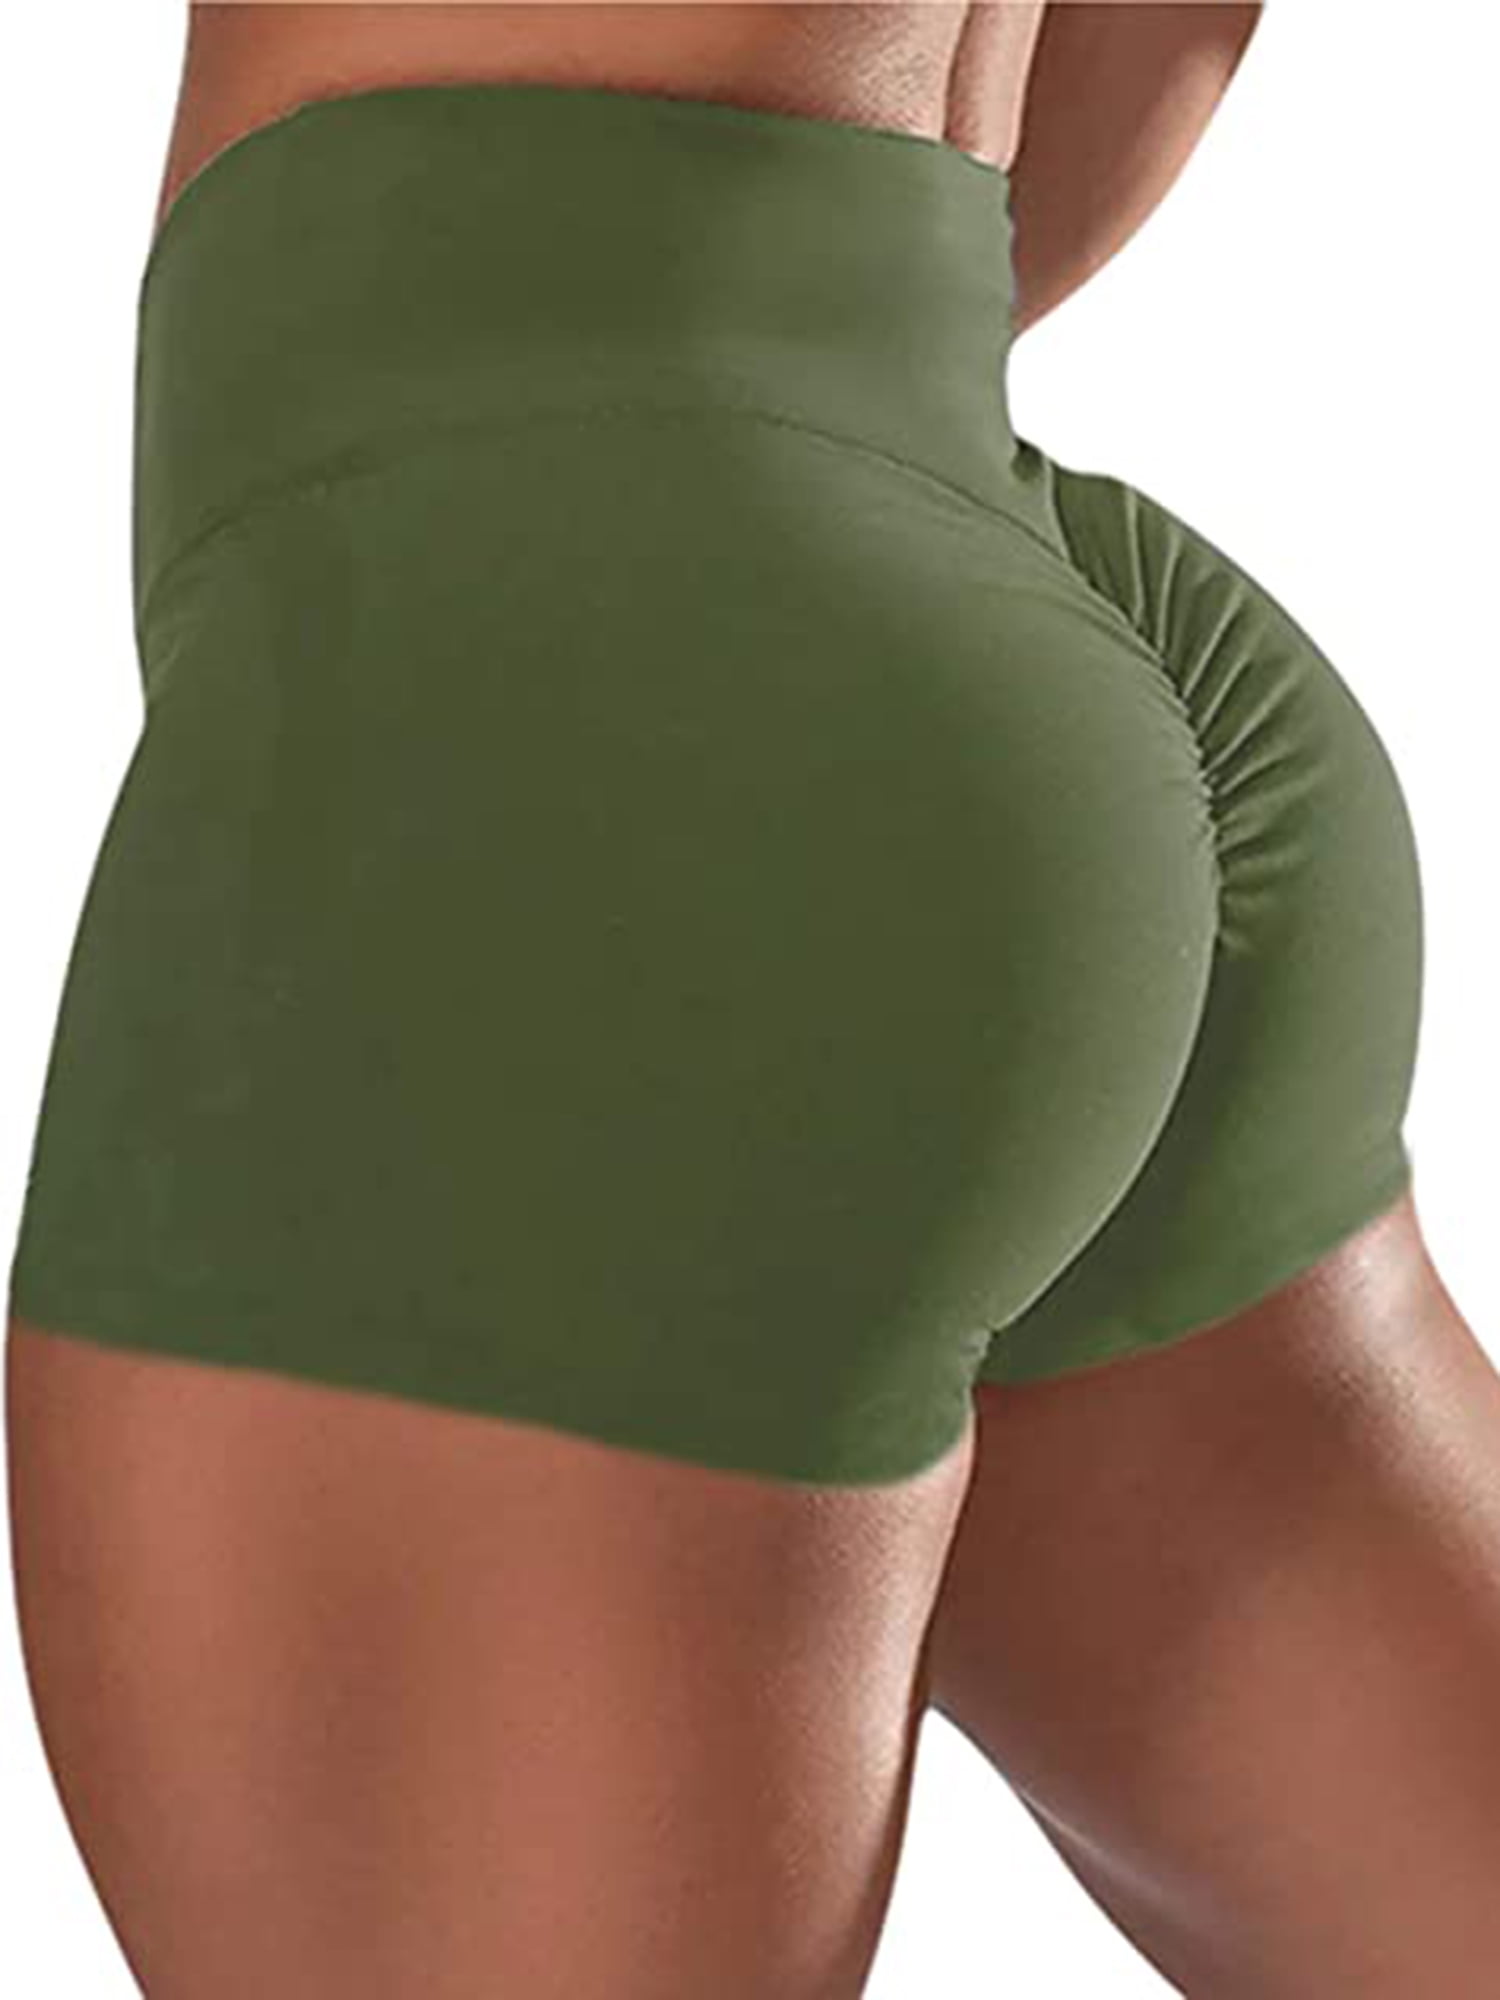 Womens Booty Shorts High Waisted Yoga Shorts Ruched Butt Lifting